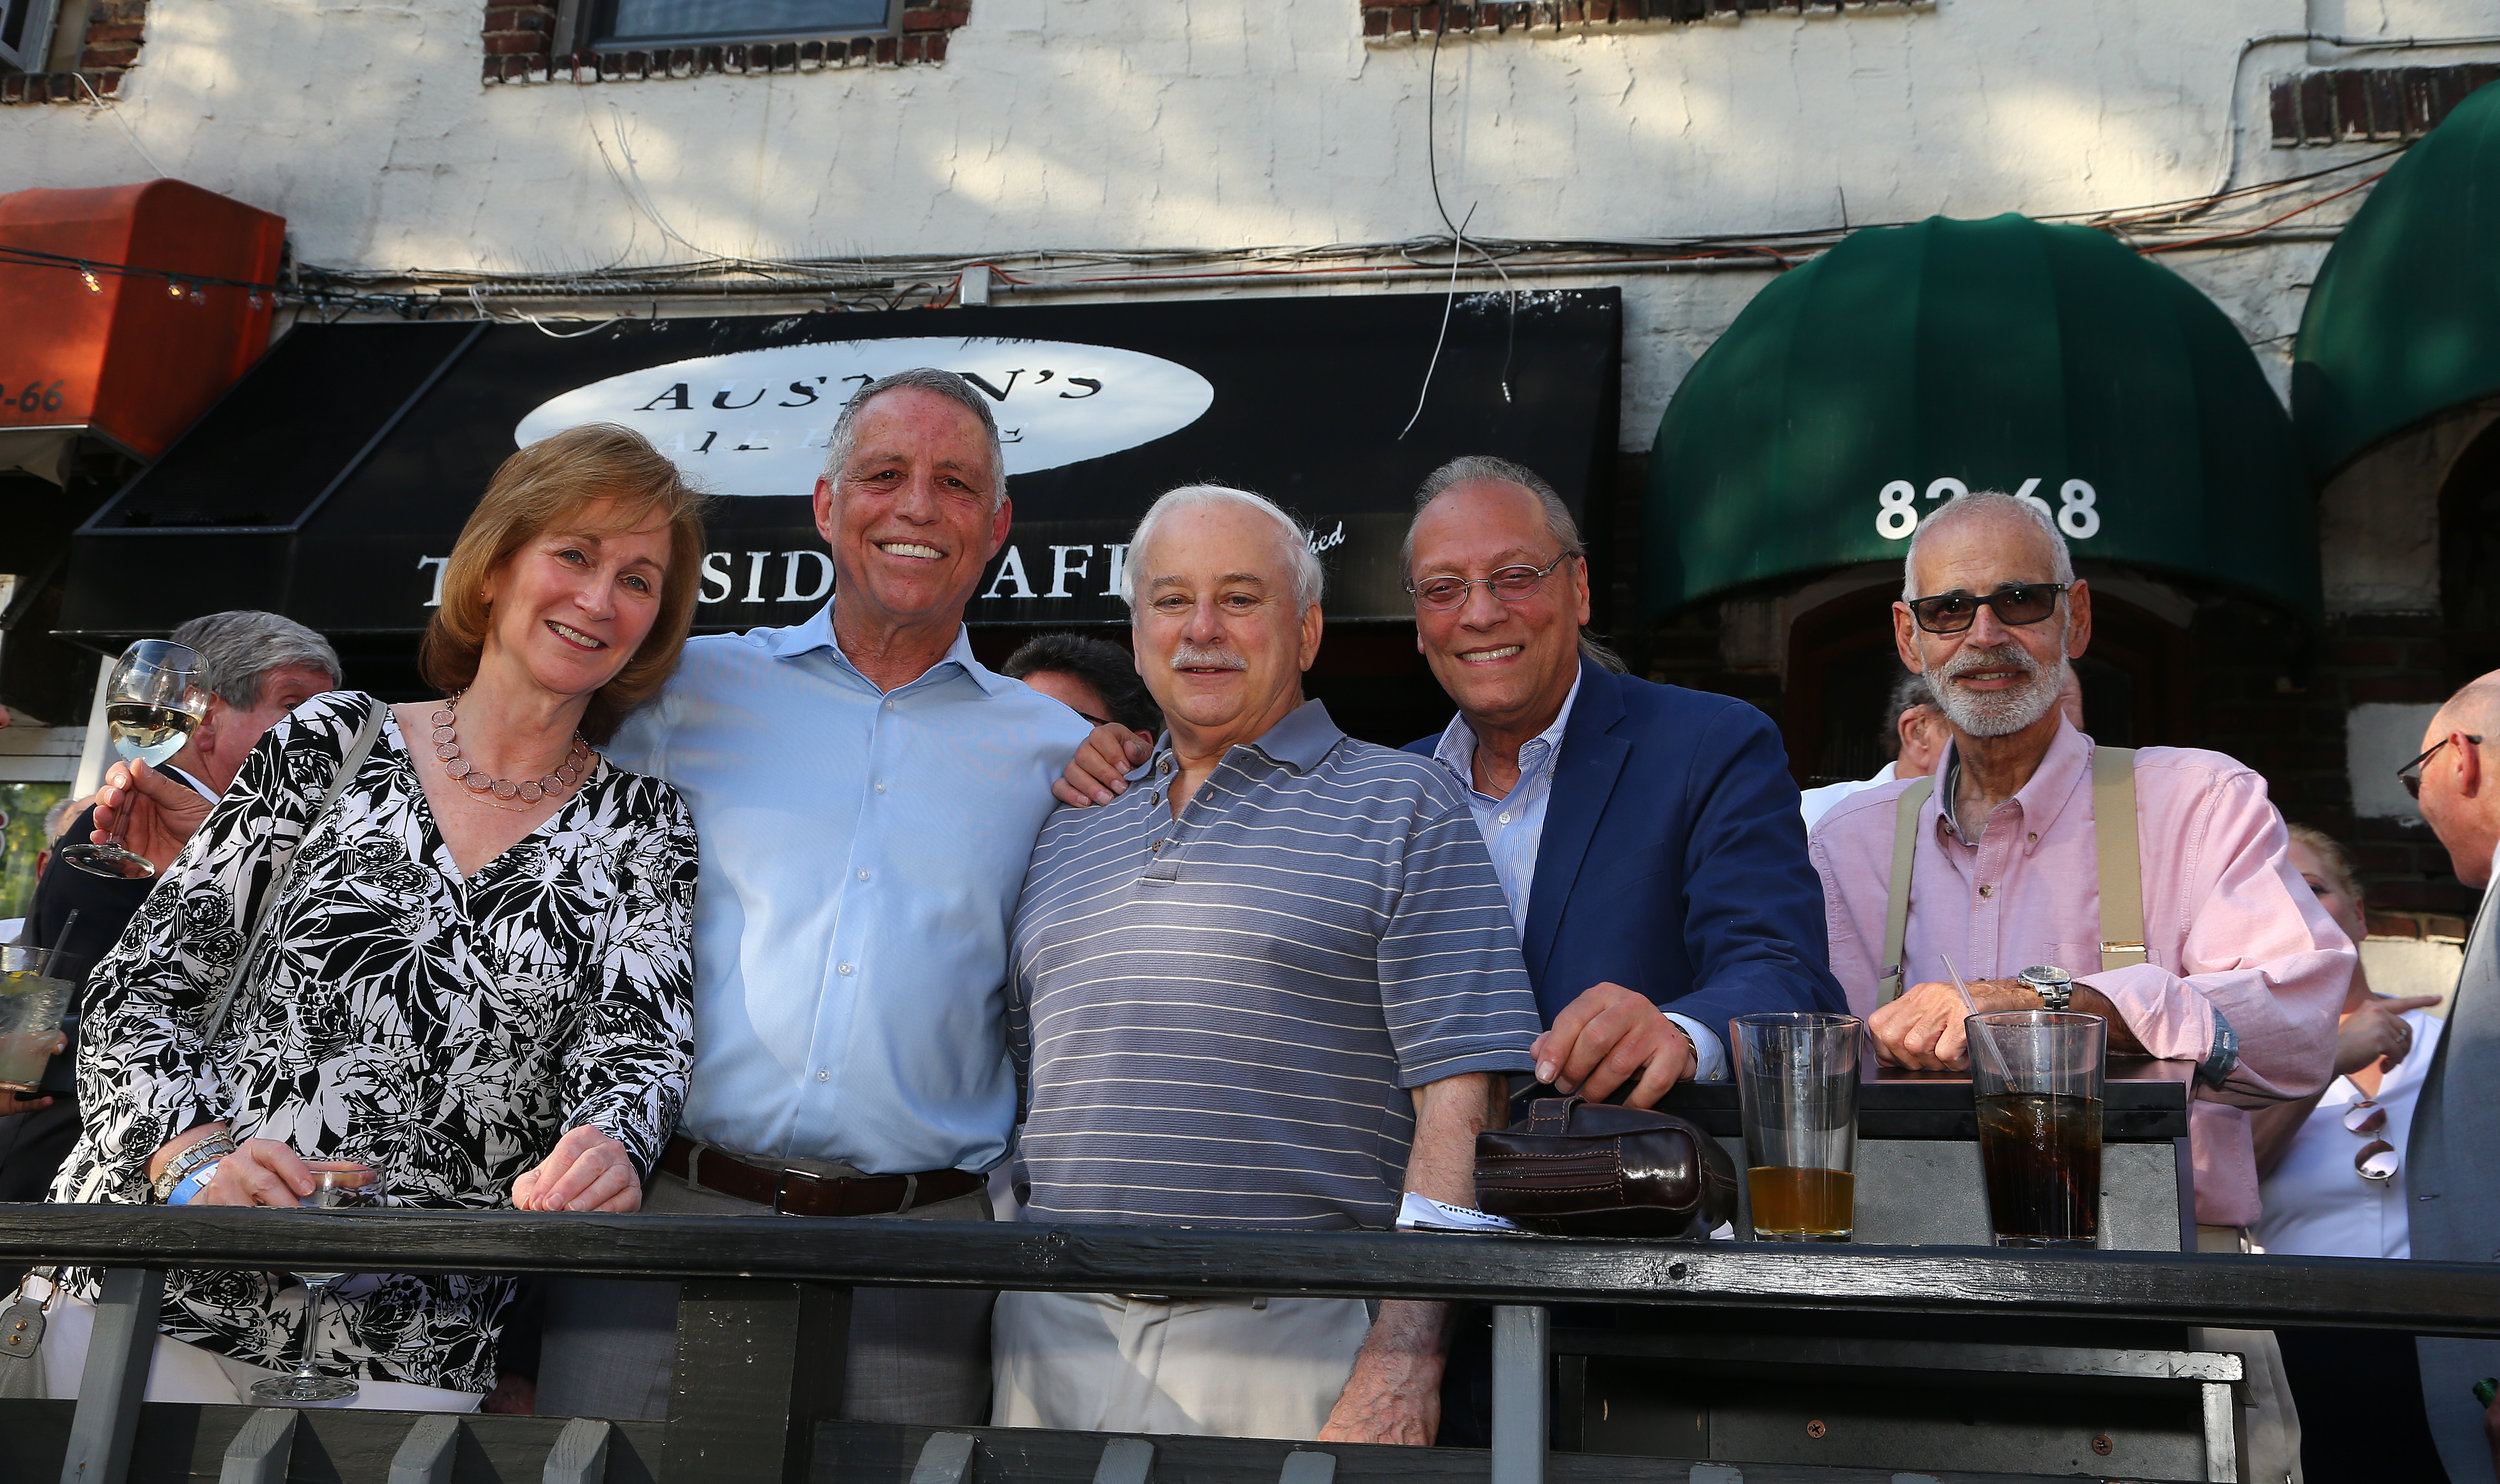  From left, Bonnie Cohen, Todd Greenberg, the Hon. Greg Lasak, Dominic Addabbo and the Hon. George Heymann. 